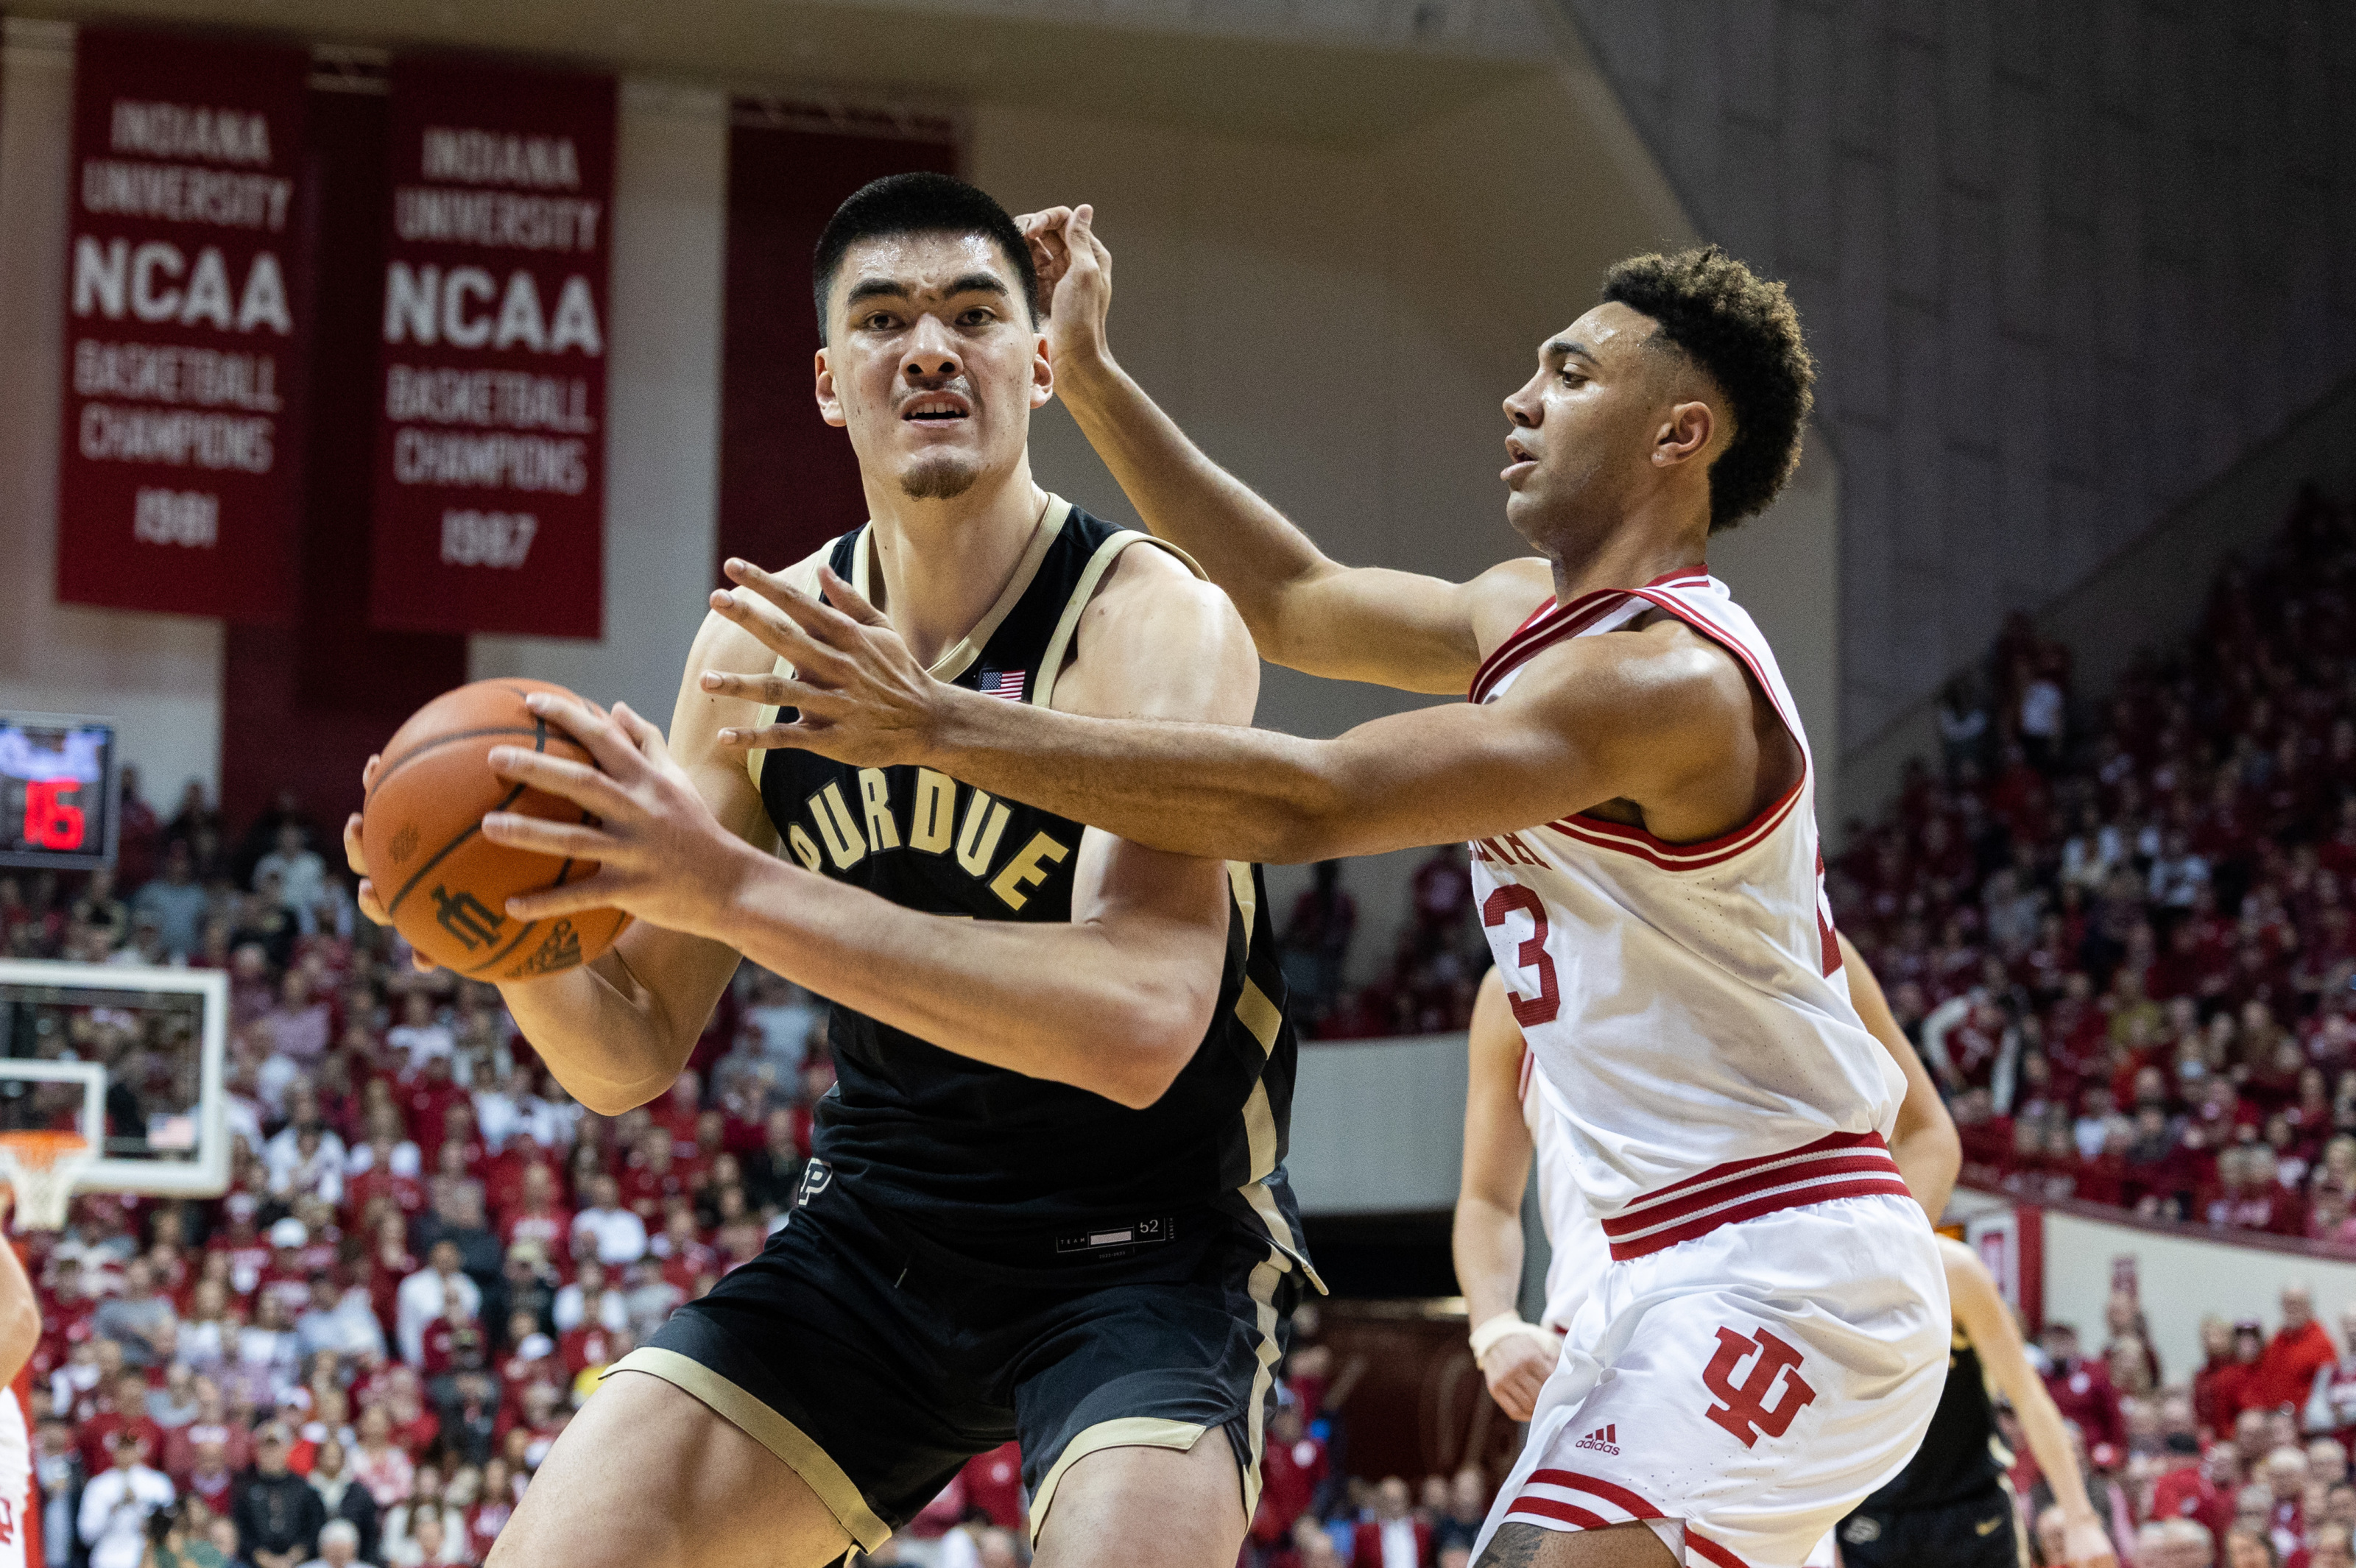 Indiana vs Purdue 2022-23 college basketball game preview, TV schedule